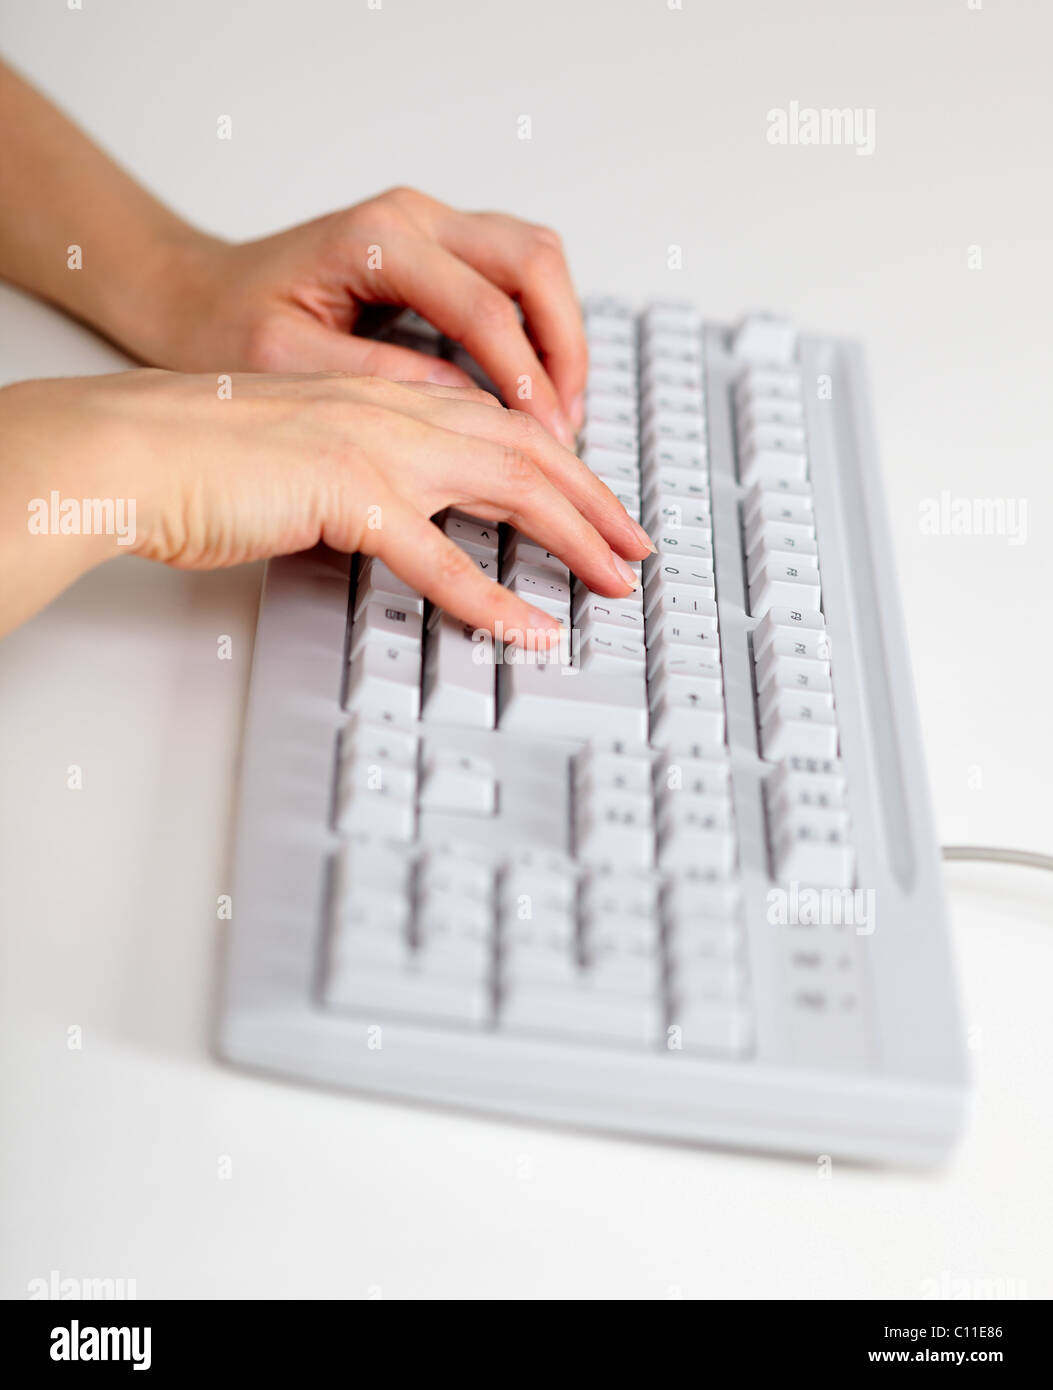 Female hands working with computer keyboard Stock Photo